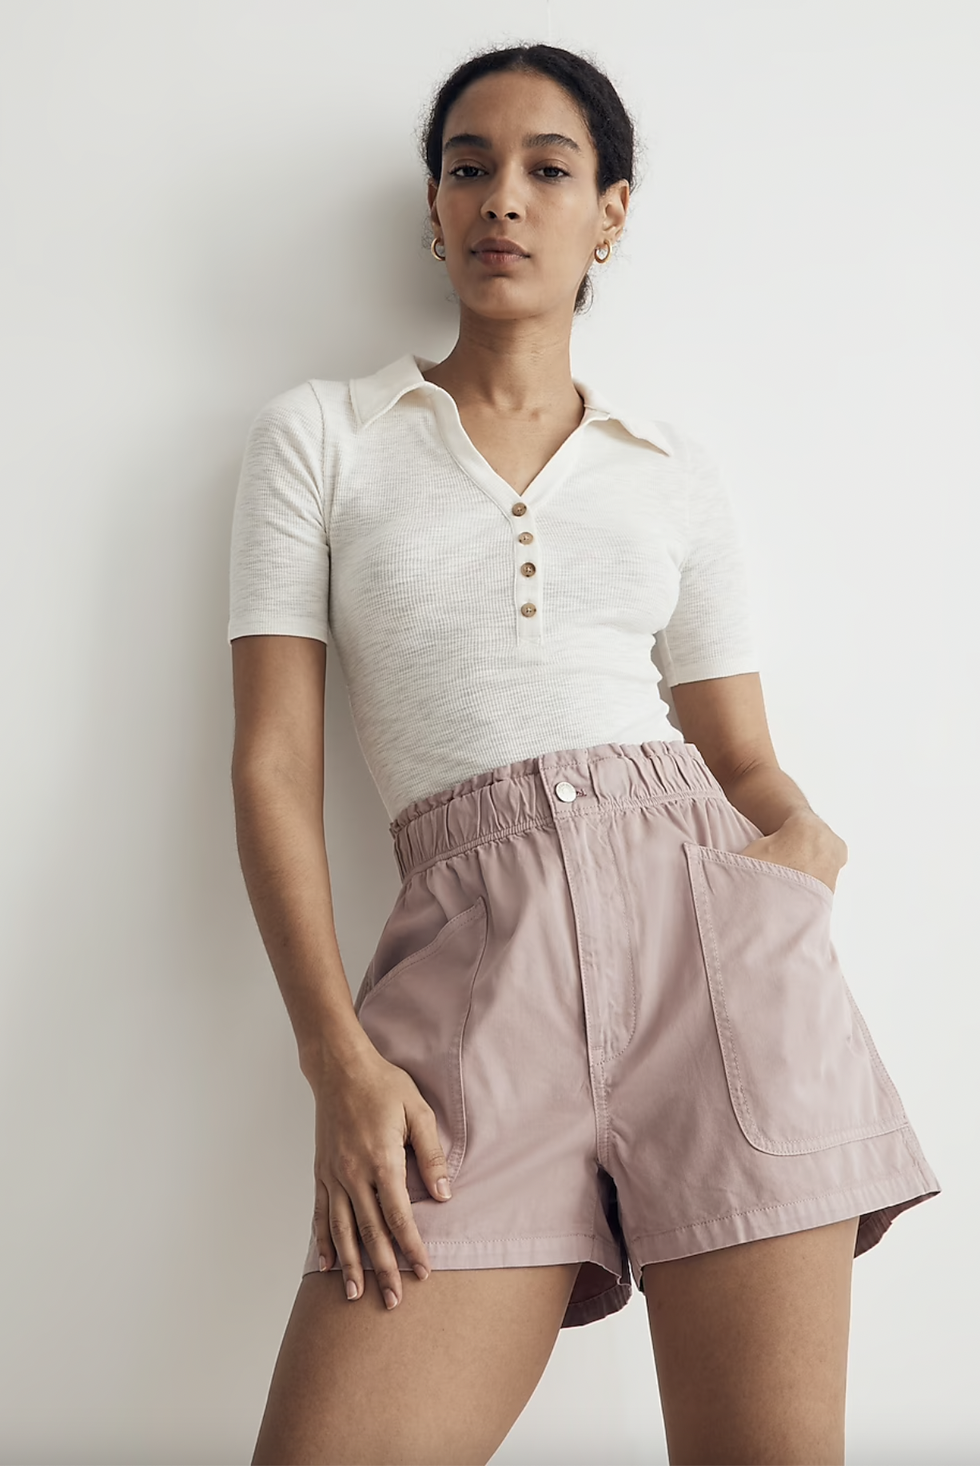 Best Summer Shorts to Shop in 2023 - 27 Pairs of Cute Shorts